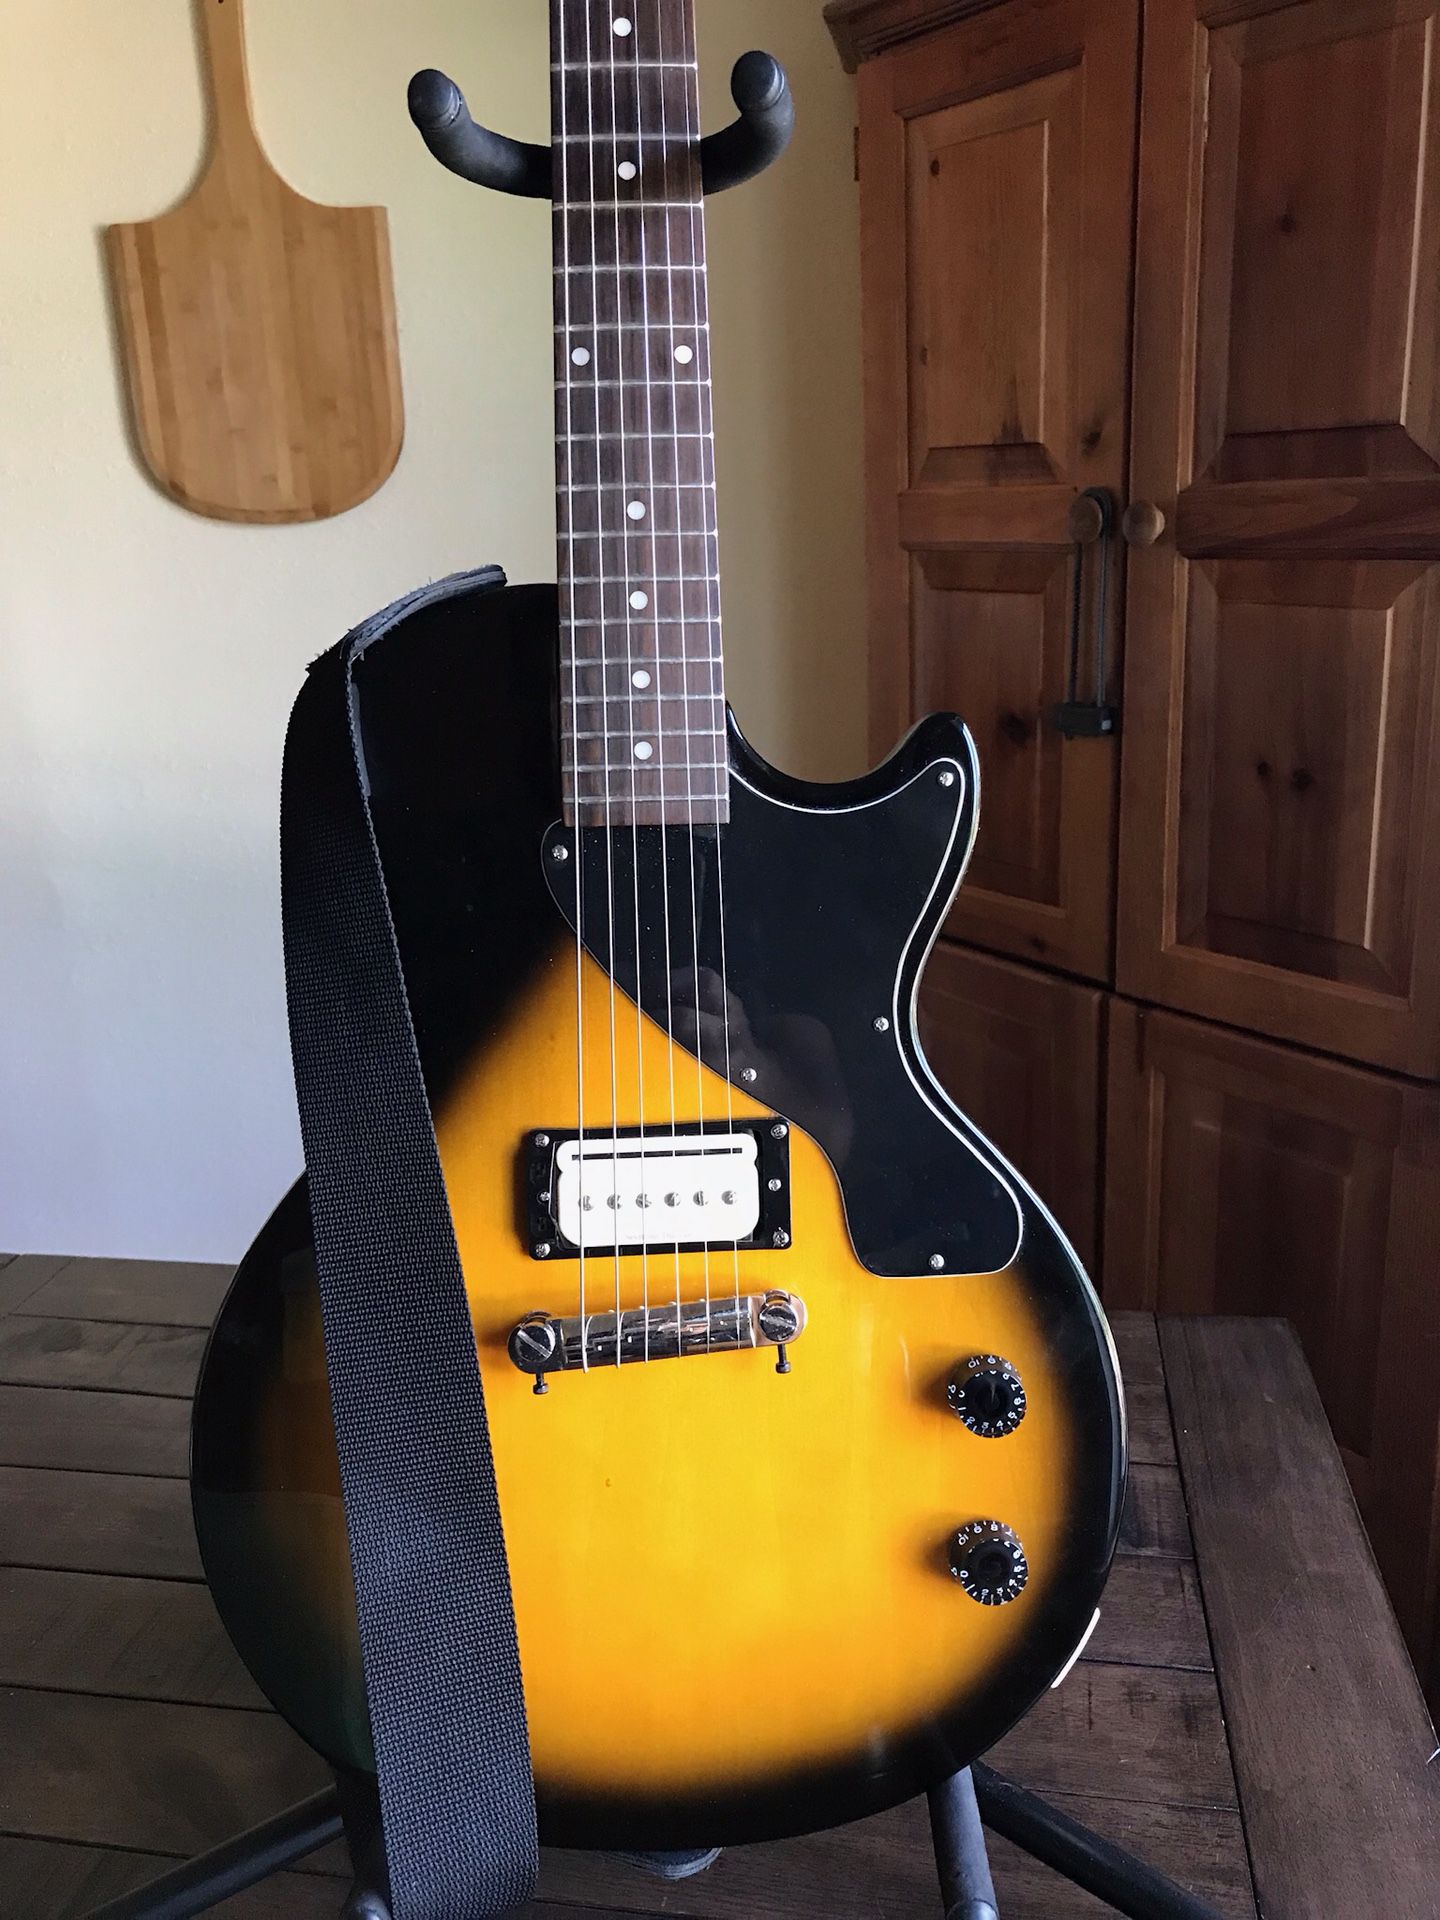 Epiphone Les Paul Junior guitar by Gibson with Seymour Duncan P-Rails